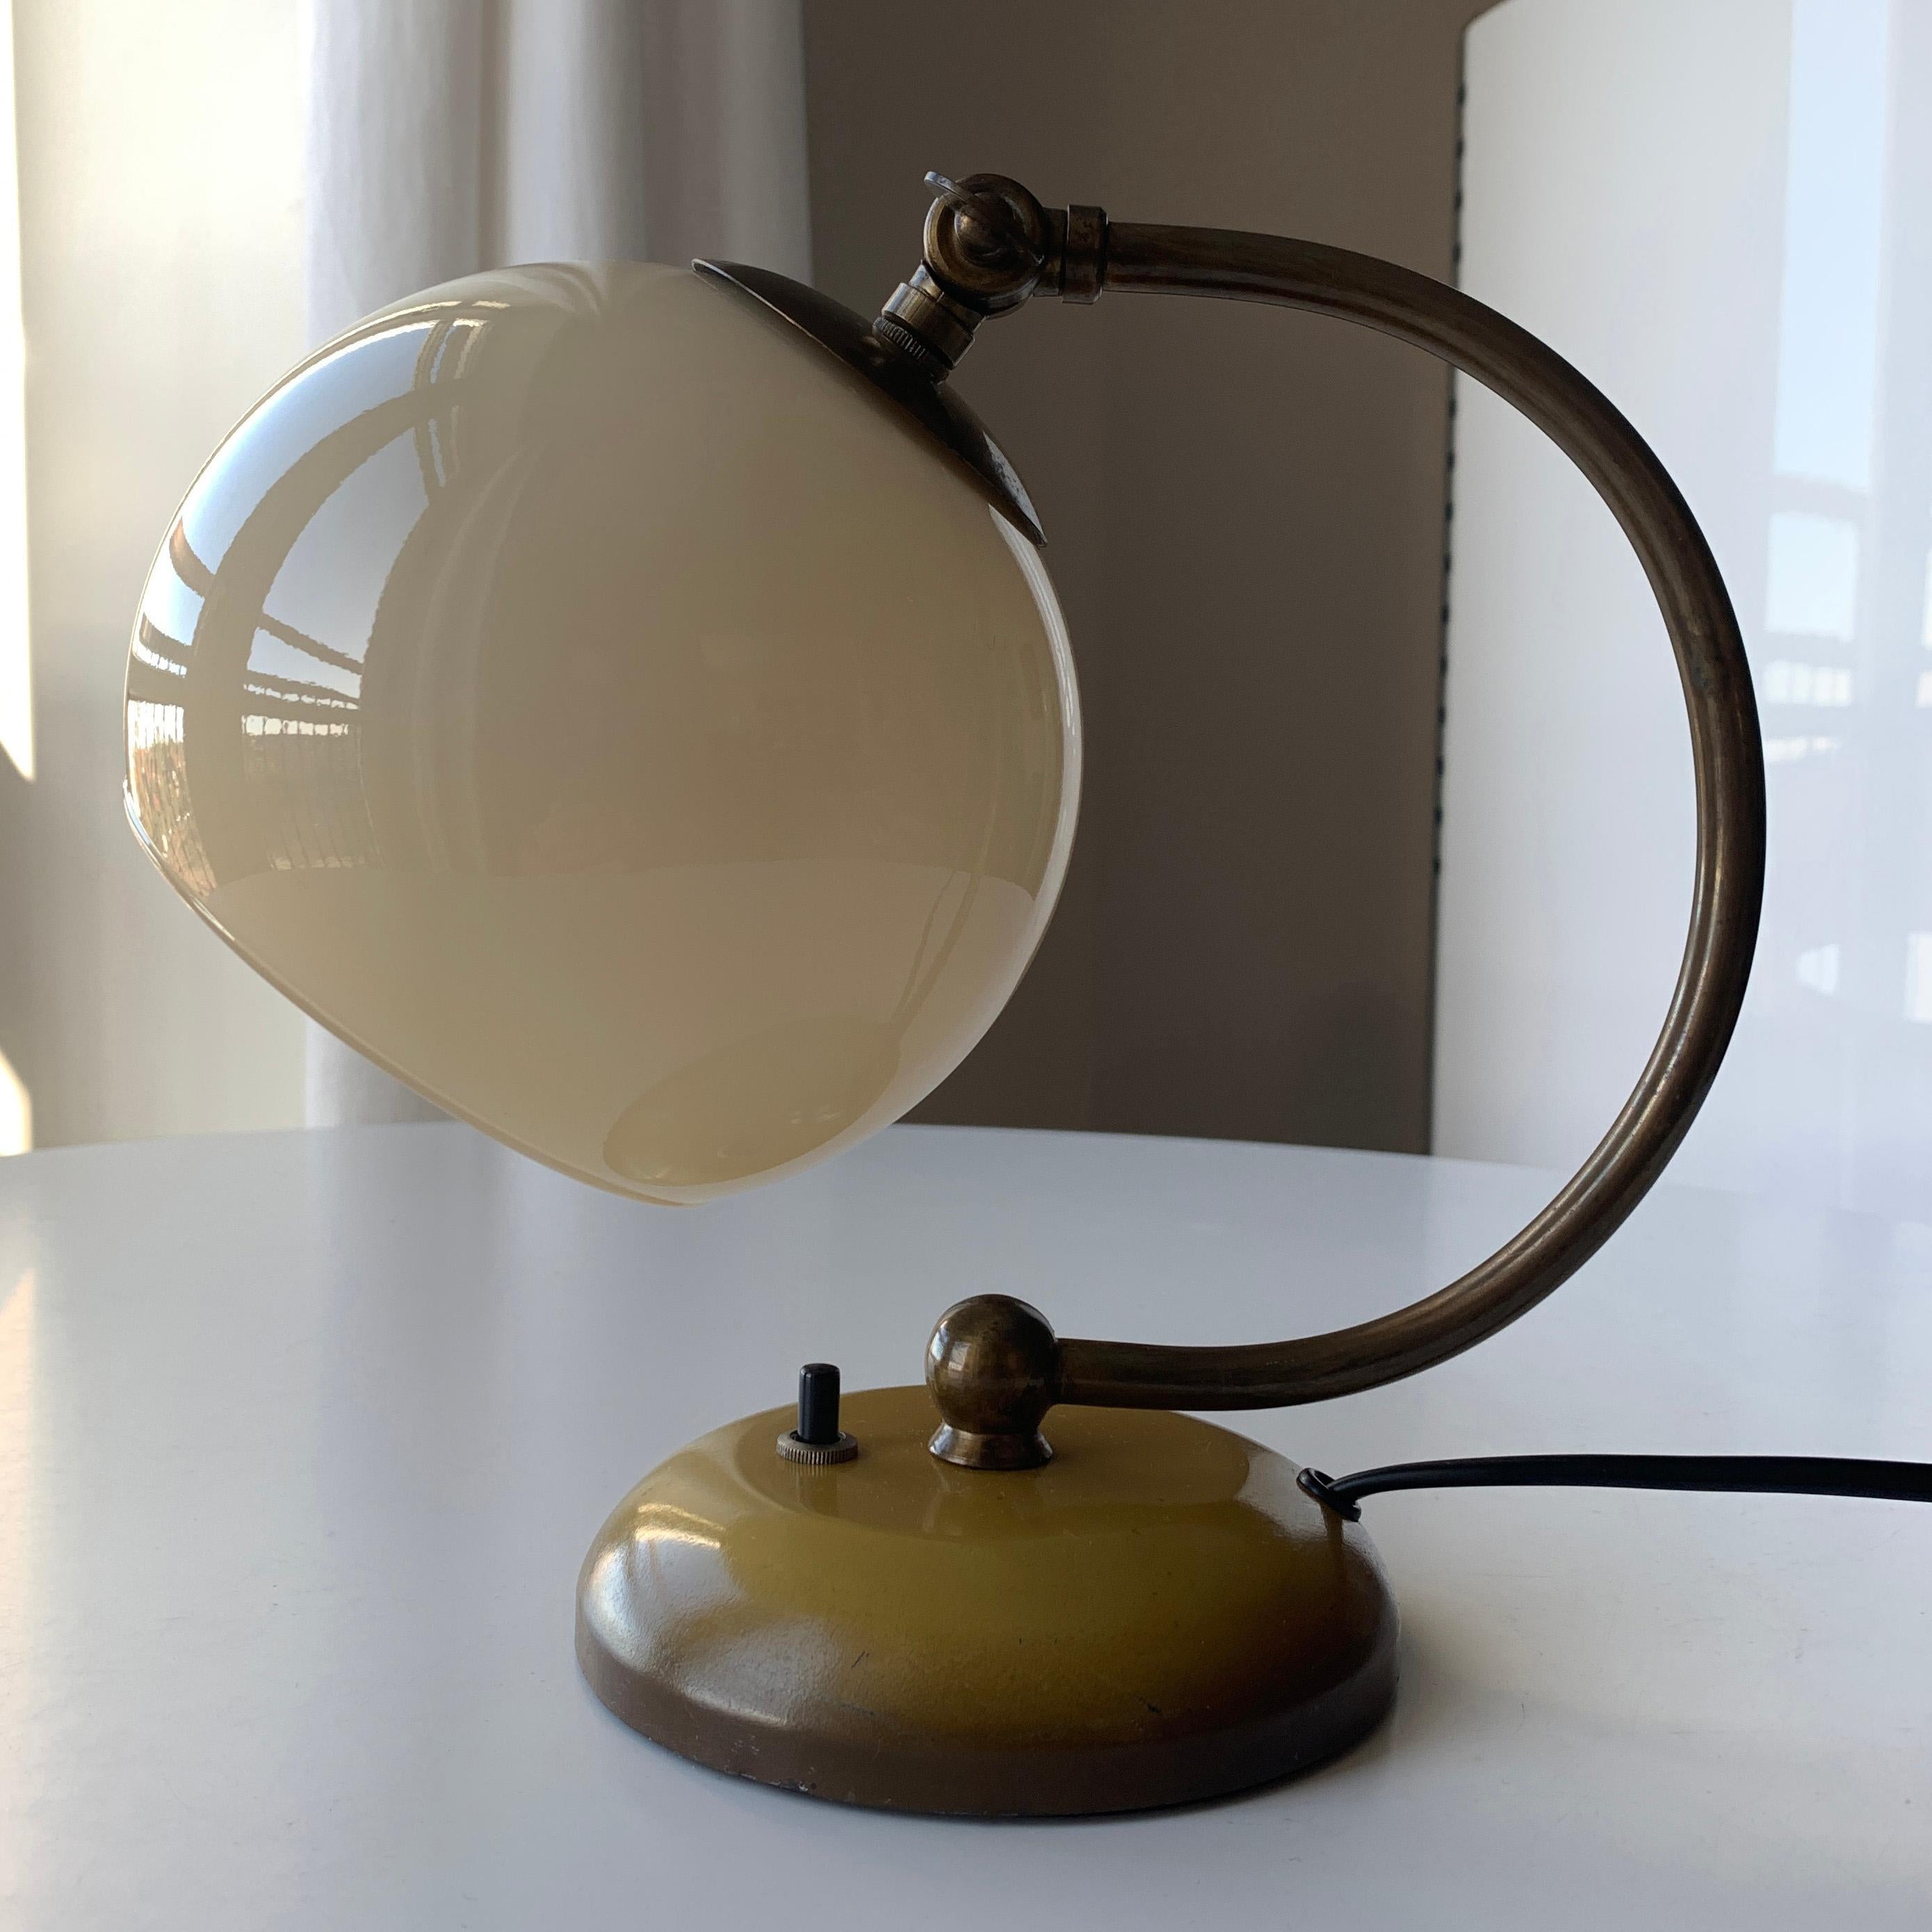 Danish Art Deco bedside table lamp manufactured by Danish company Fog & Mørup in the period of 1920s-1950s. A Fog & Mørup model based on the same design that can stand on table or hang on wall. A curved neck with an adjustable shade holder to set